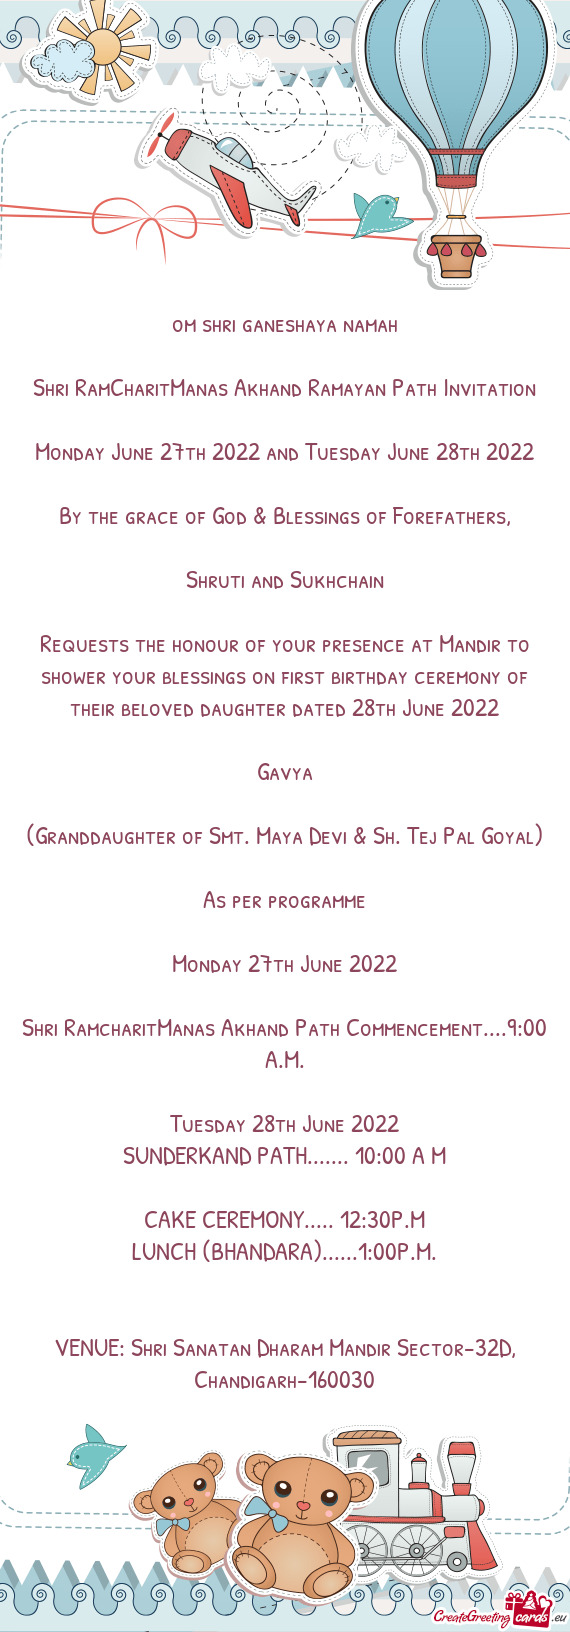 Requests the honour of your presence at Mandir to shower your blessings on first birthday ceremony o